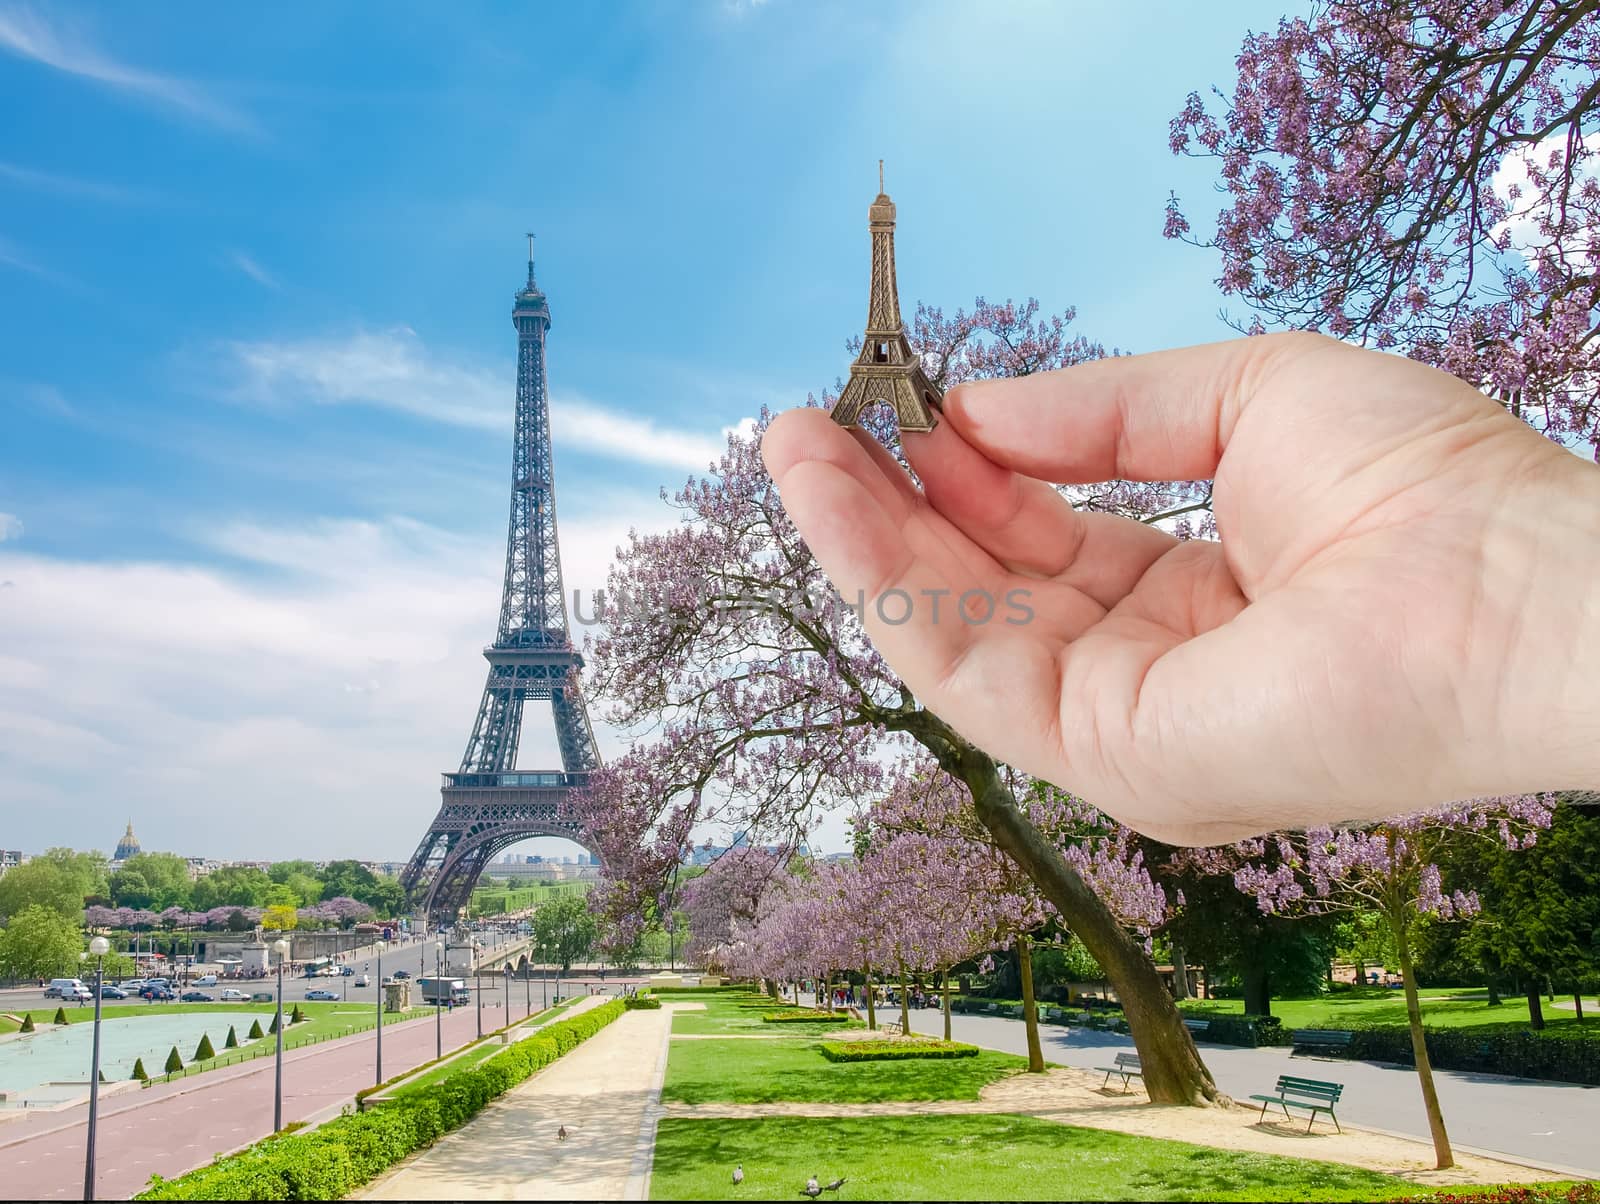 View of the Eiffel Tower from park and  Trocadero Square with small metal Eiffel Tower model in man's hand in a foreground in Paris
